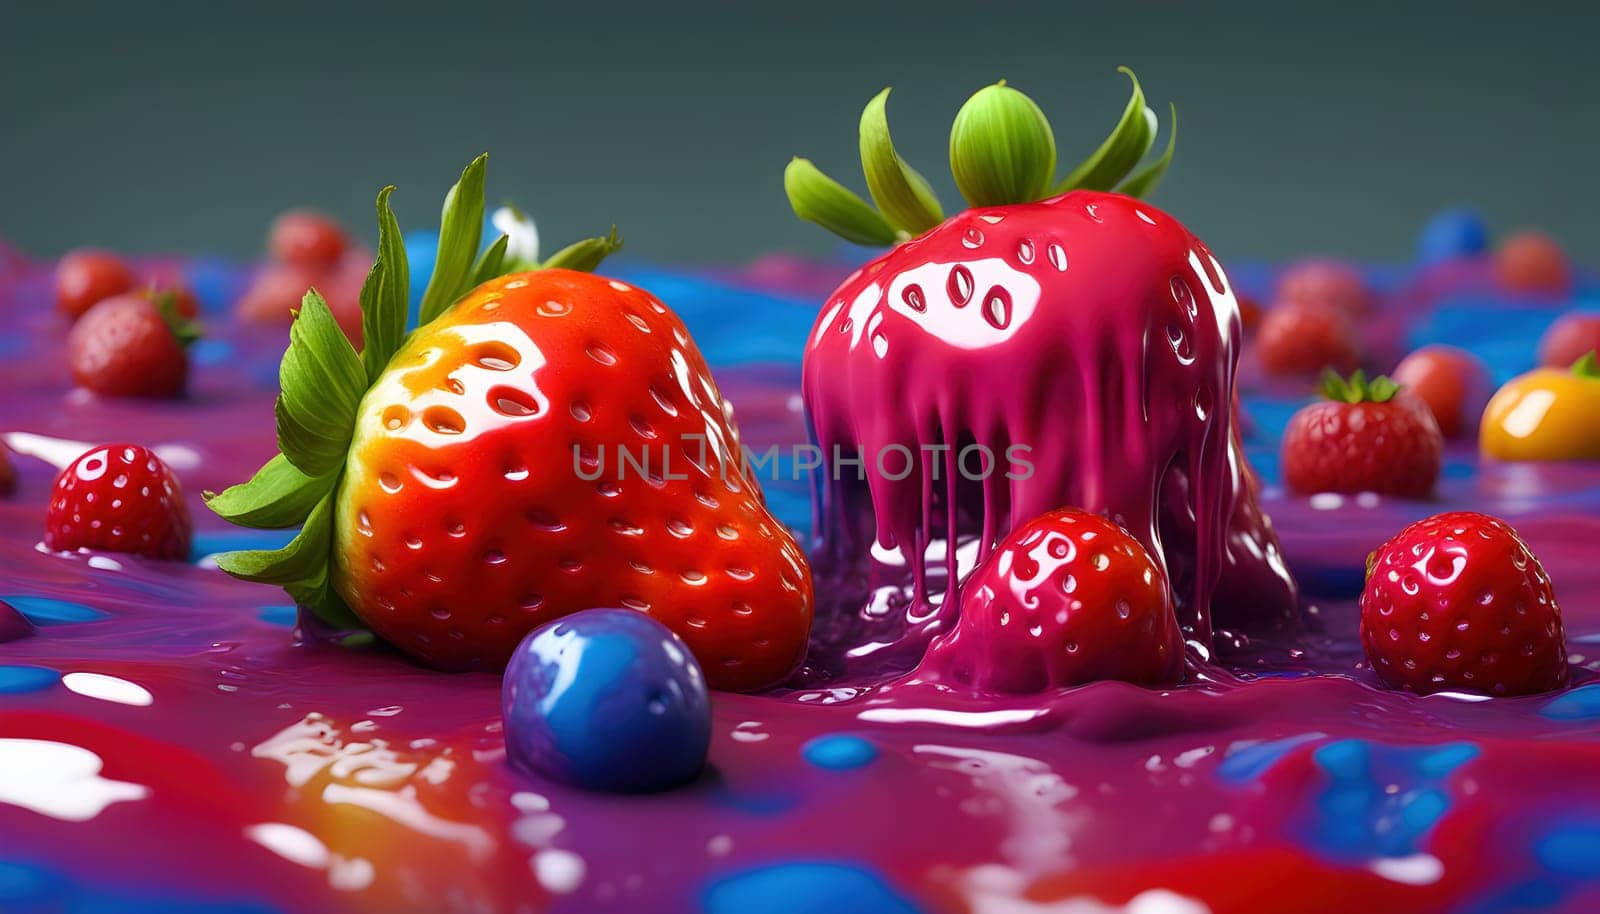 Strawberries and Berries Covered in Glossy Liquid by rostik924